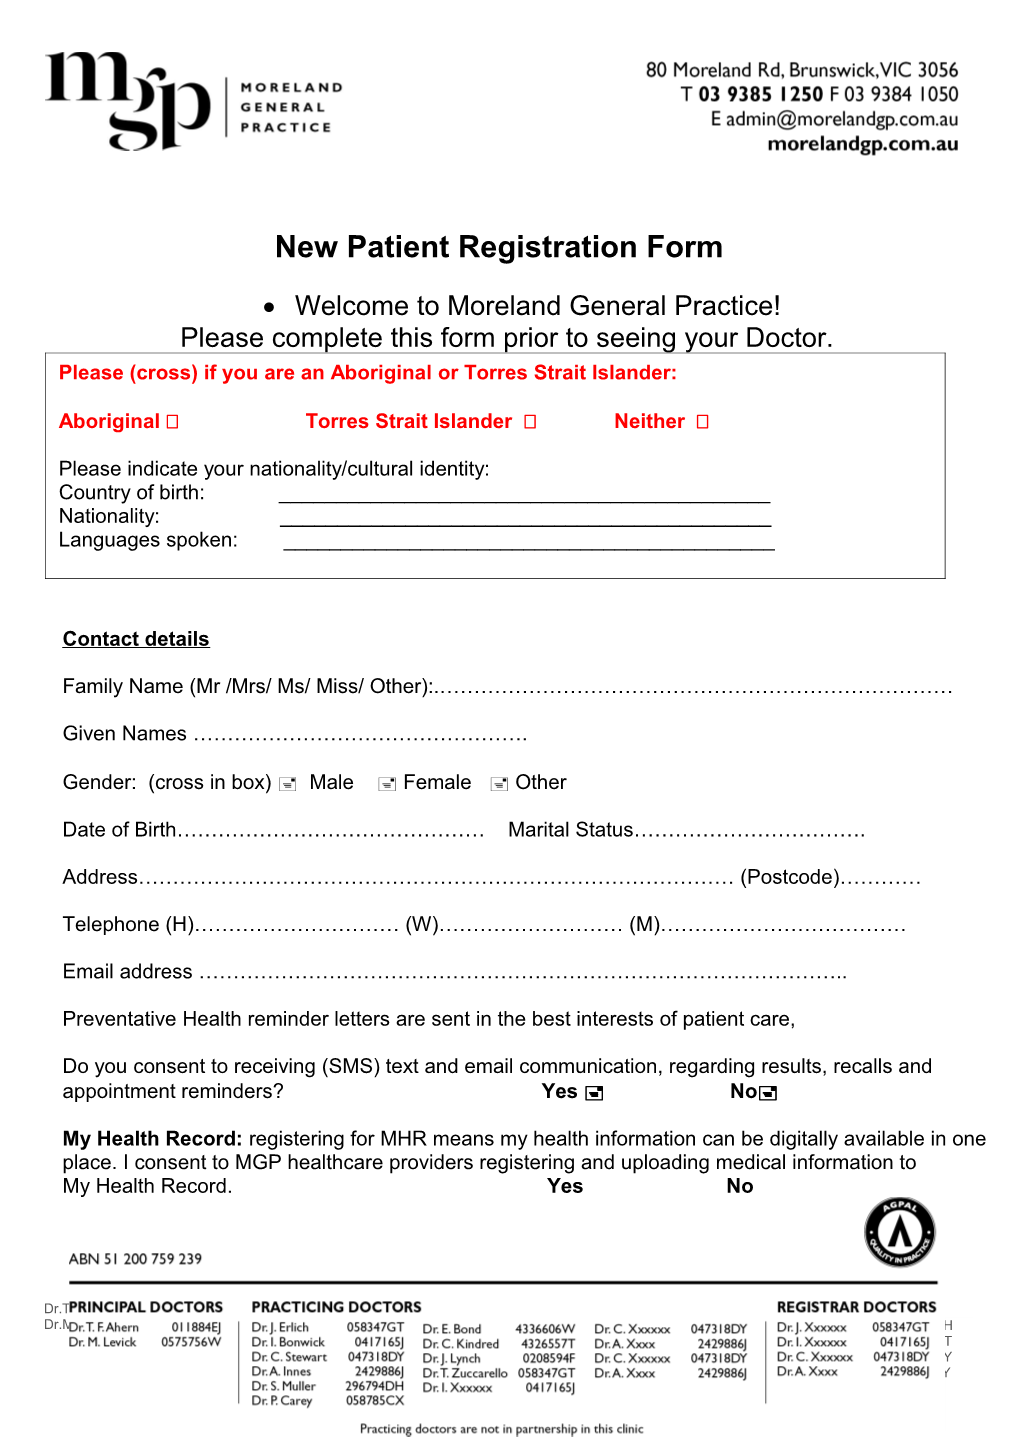 Please Complete This Form Prior to Seeing Your Doctor